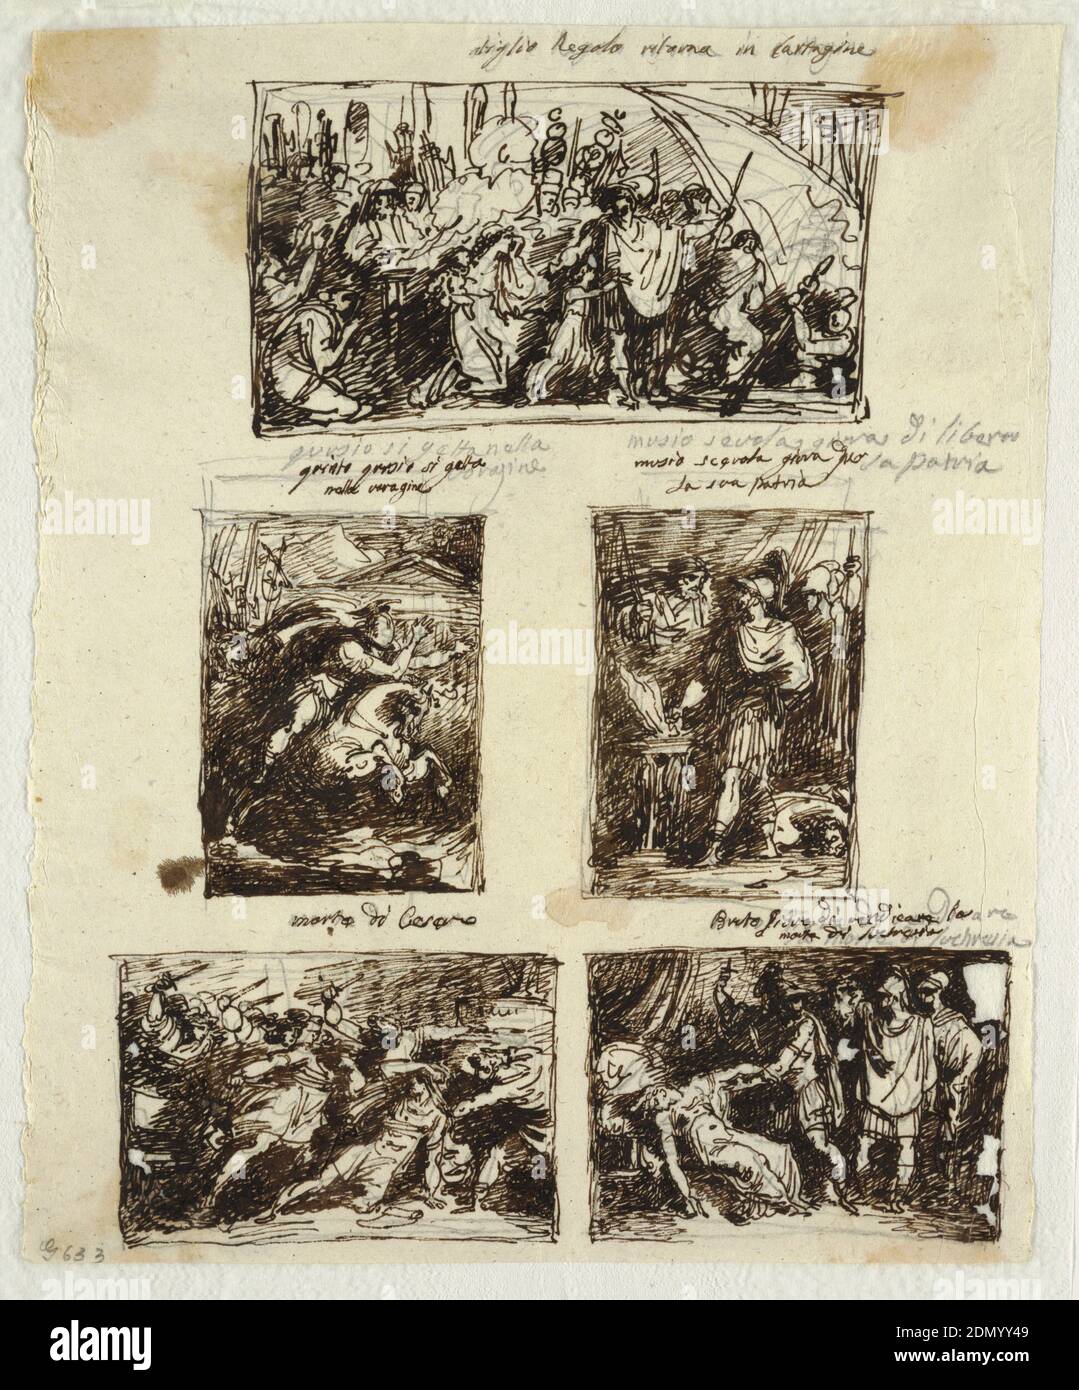 Design for Various Decorations including Coriolanus at the Walls of Rome, Felice Giani, Italian, 1758–1823, Pen and brown ink, brush and wash over black chalk on laid paper, Left row, above: putto blowing double flute; at right, an altar. Center: putto with wreath running into chariot with panoply. Below: putto with legionary sign beside trophy. Central row, above: Coriolanus implored by women of Rome, rising from throne at right. Center: left half of decoration is roughly sketched. In center is high shaft with bowl, Rinceaux spring from it, putti and boy are between them. Stock Photo